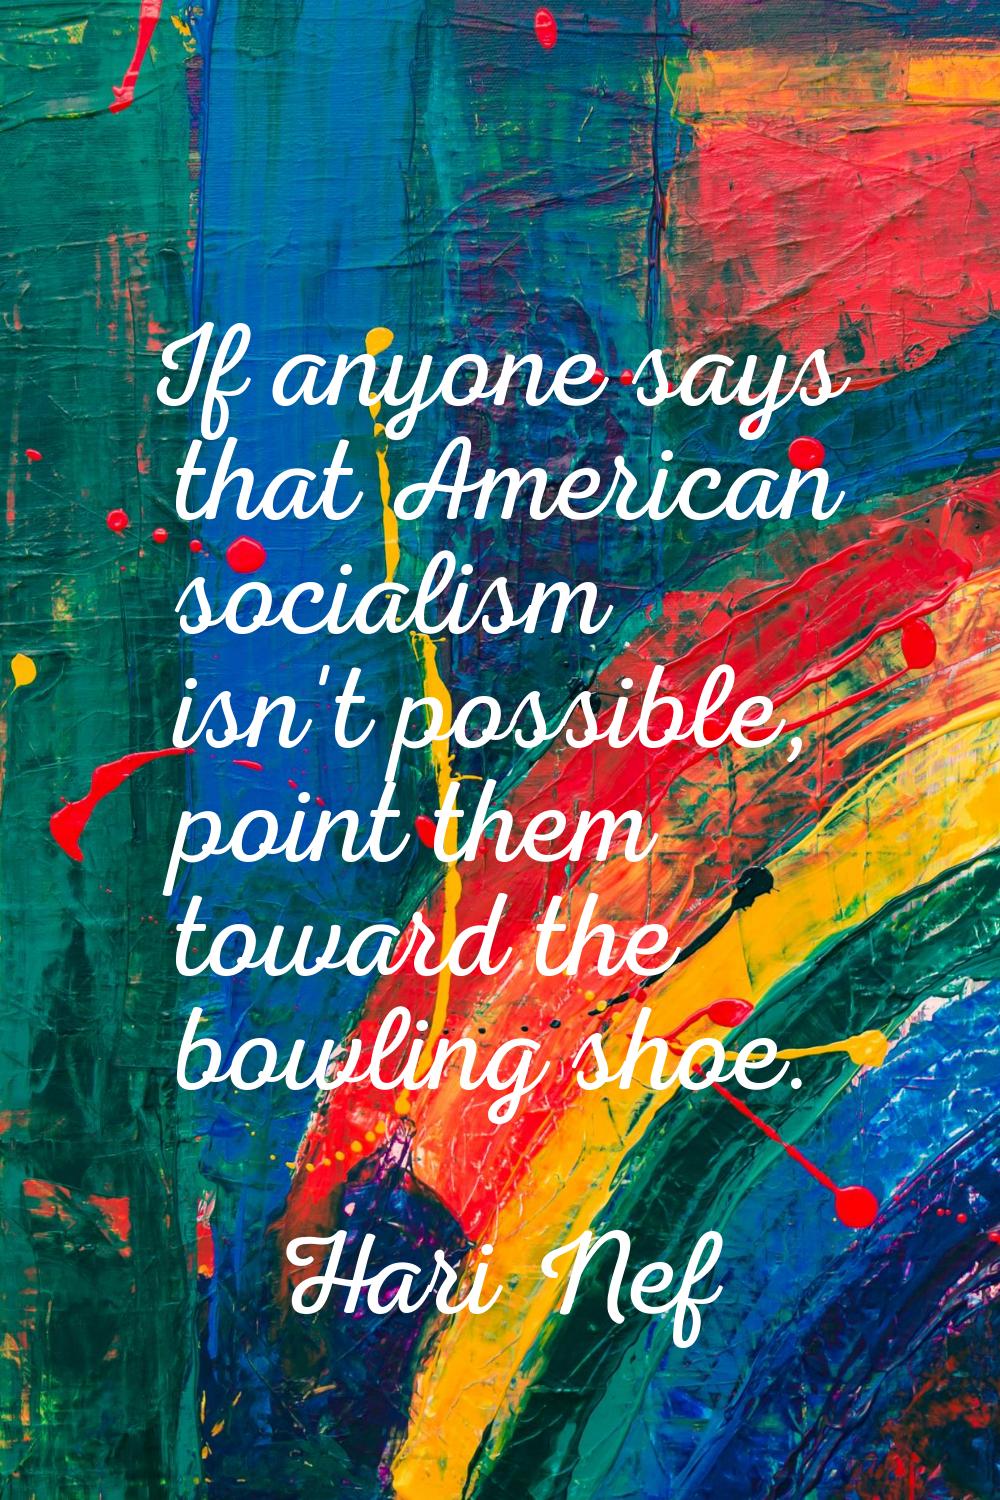 If anyone says that American socialism isn't possible, point them toward the bowling shoe.